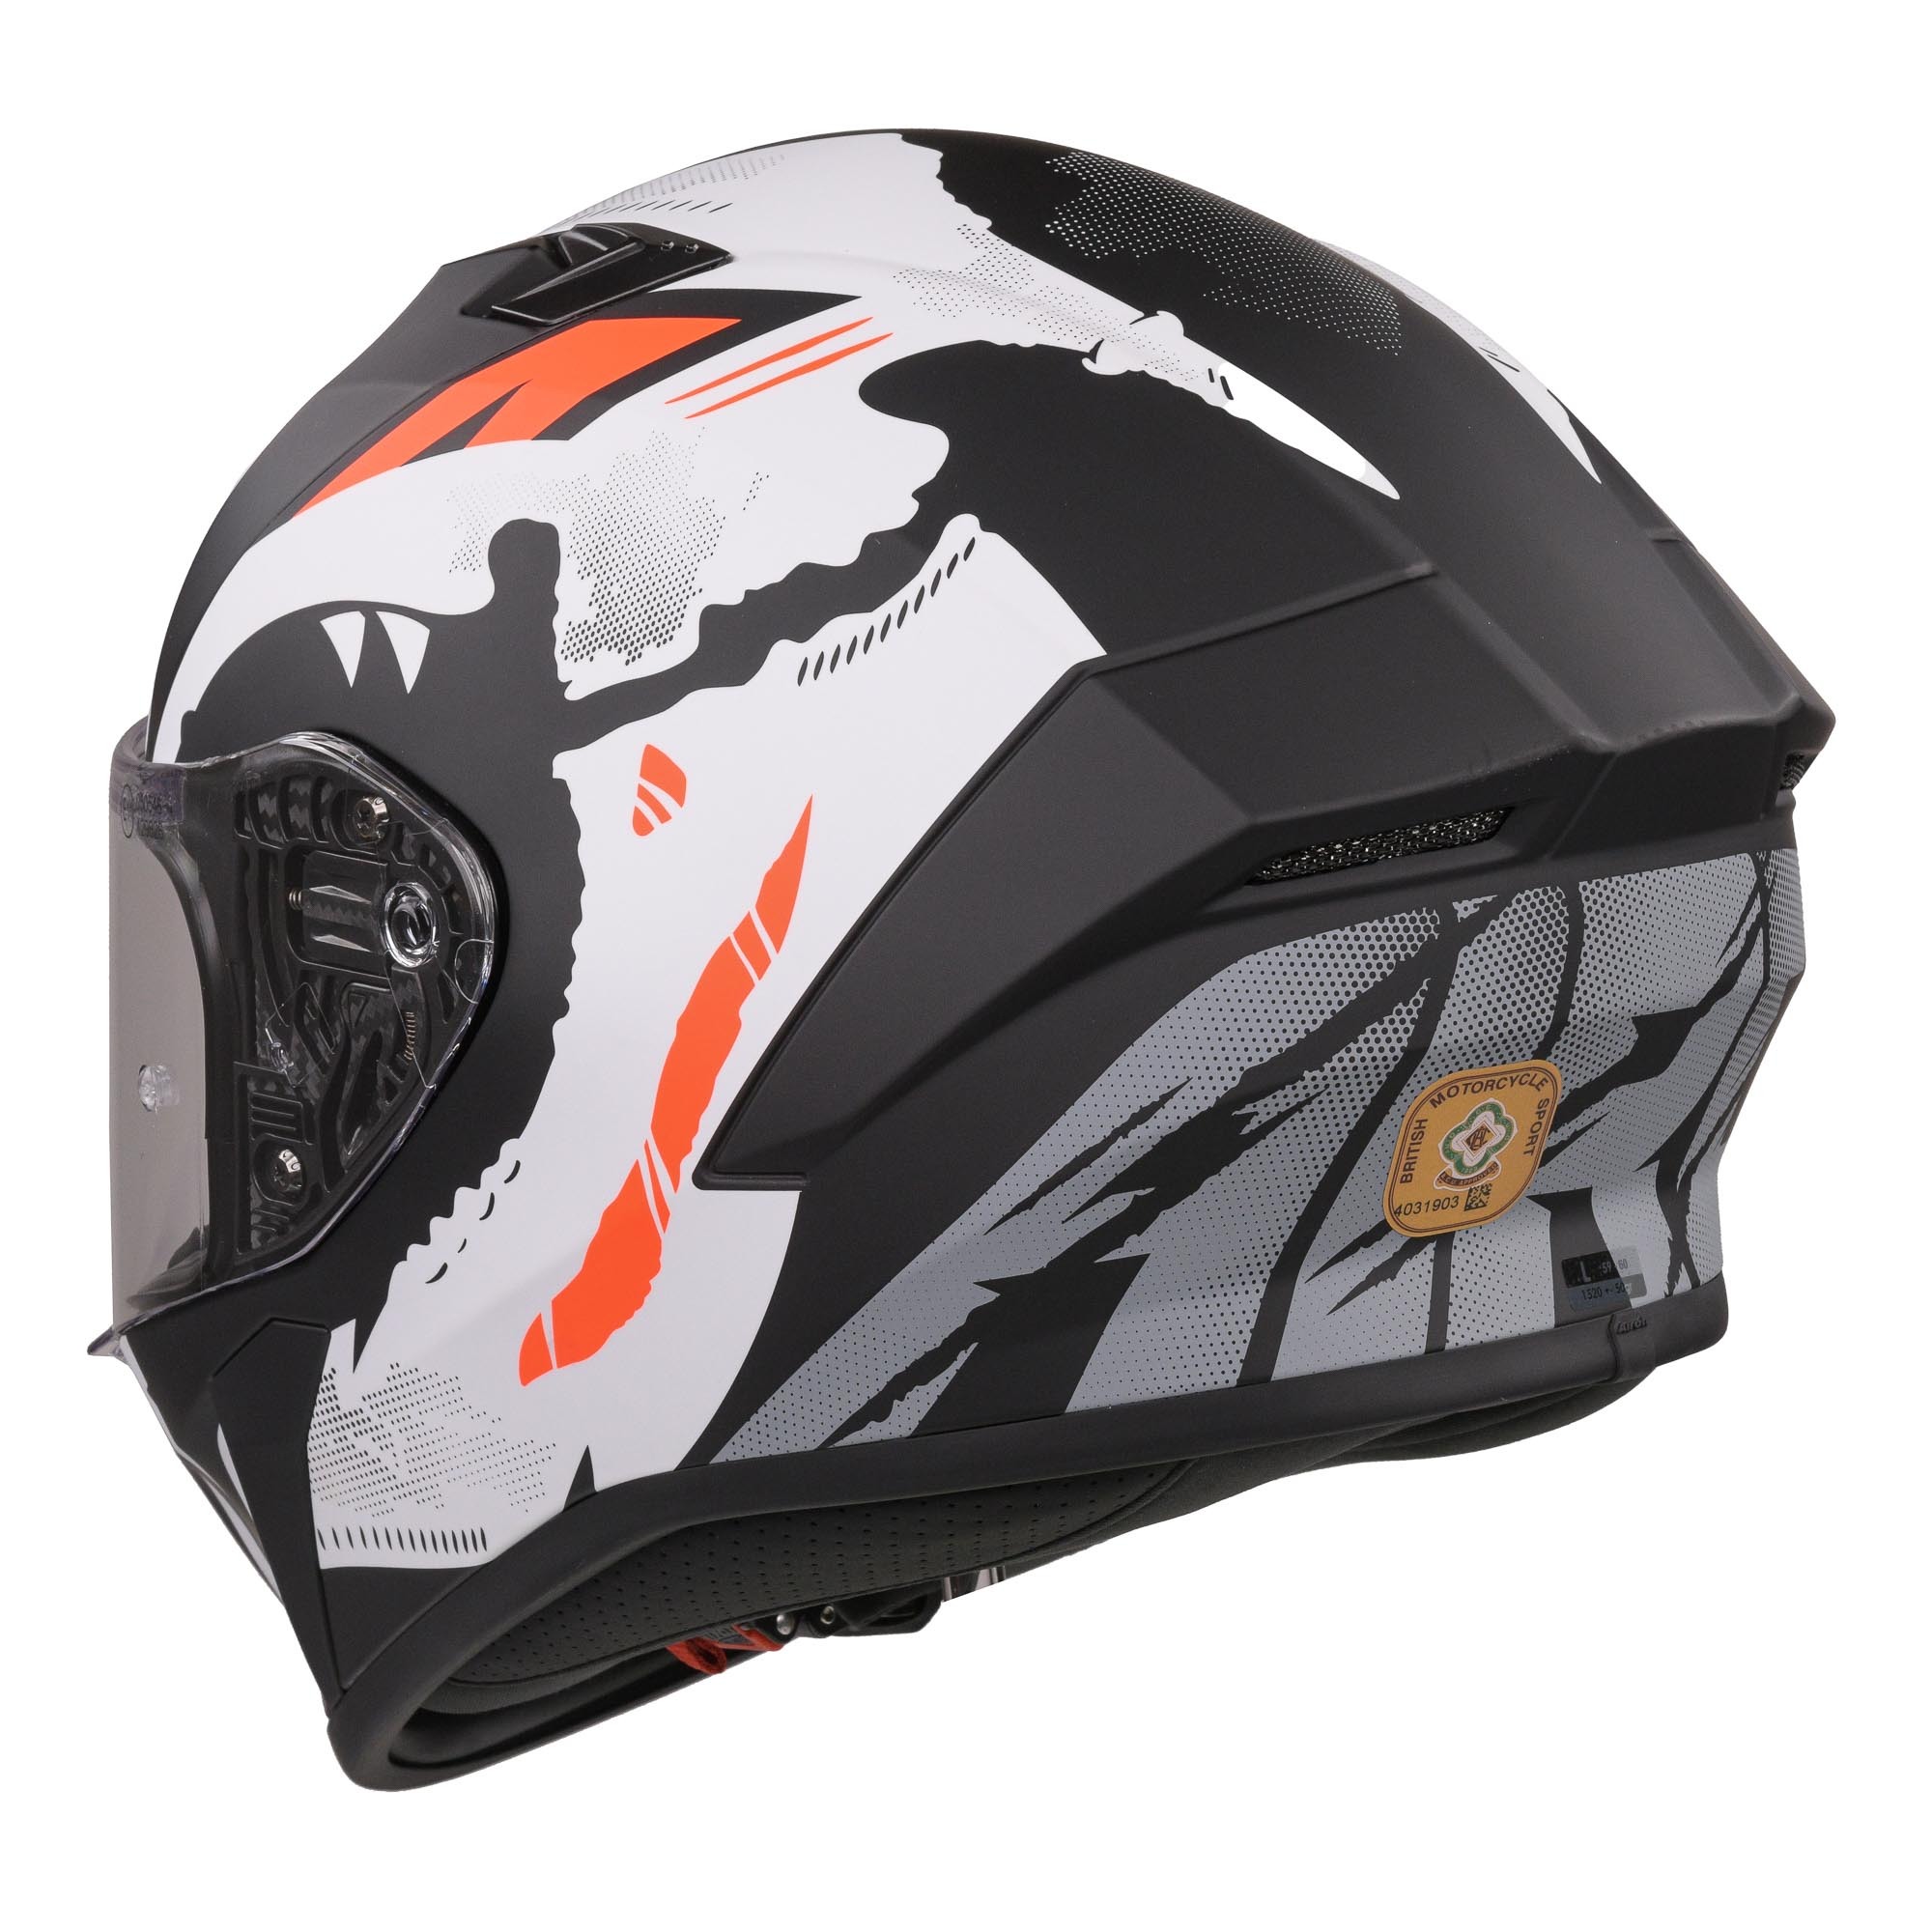 AIROH Valor Full Face Nexy Matt 2020 :: £111.95 :: Motorcycle Helmets ::  FULL FACE HELMETS :: WHATEVERWHEELS LTD - ATV, Motorbike & Scooter Centre -  Lancashire's Best For Quad, Buggy, 50cc & 125cc Motorcycle and Moped Sale